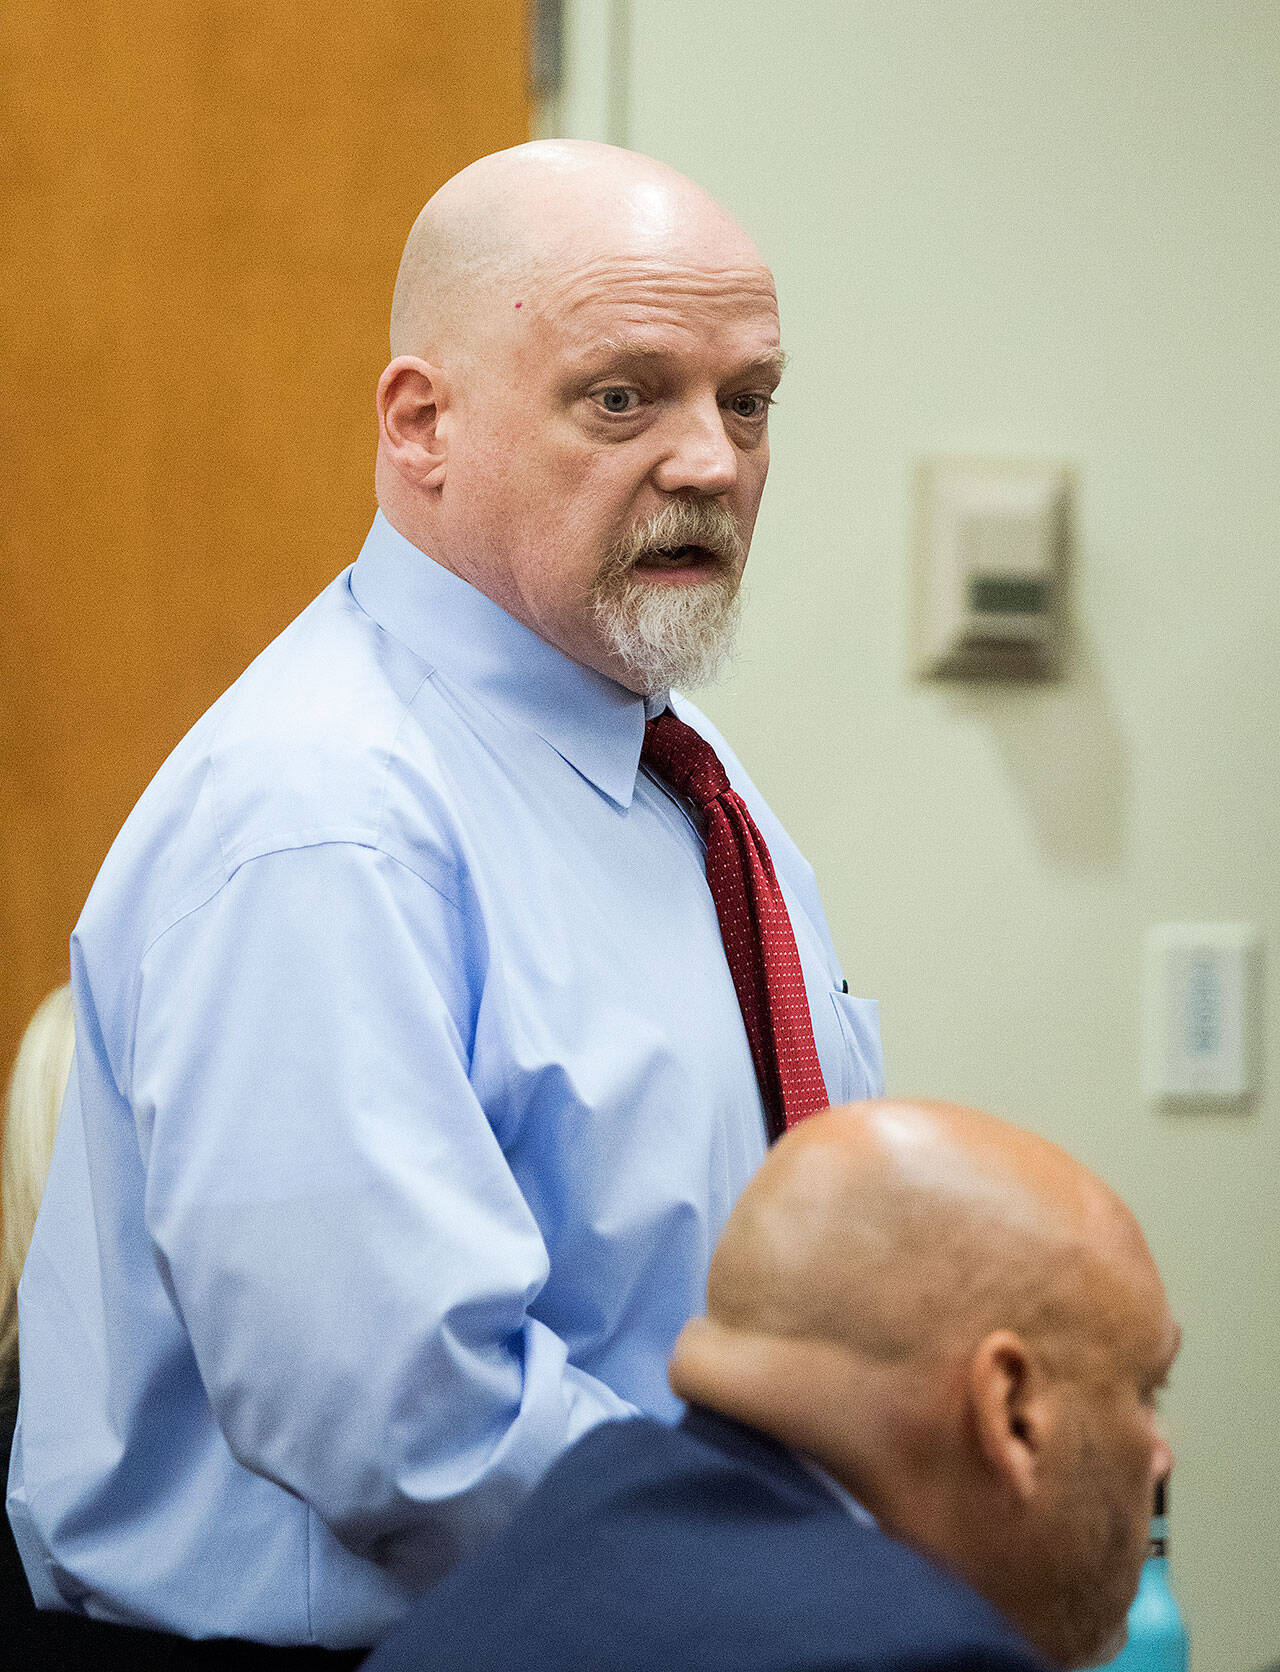 William Talbott II at the Snohomish County Courthouse on July 24, 2019, in Everett, before a judge sentenced him to life without parole for murdering a young Canadian couple in 1987. (Andy Bronson / The Herald)